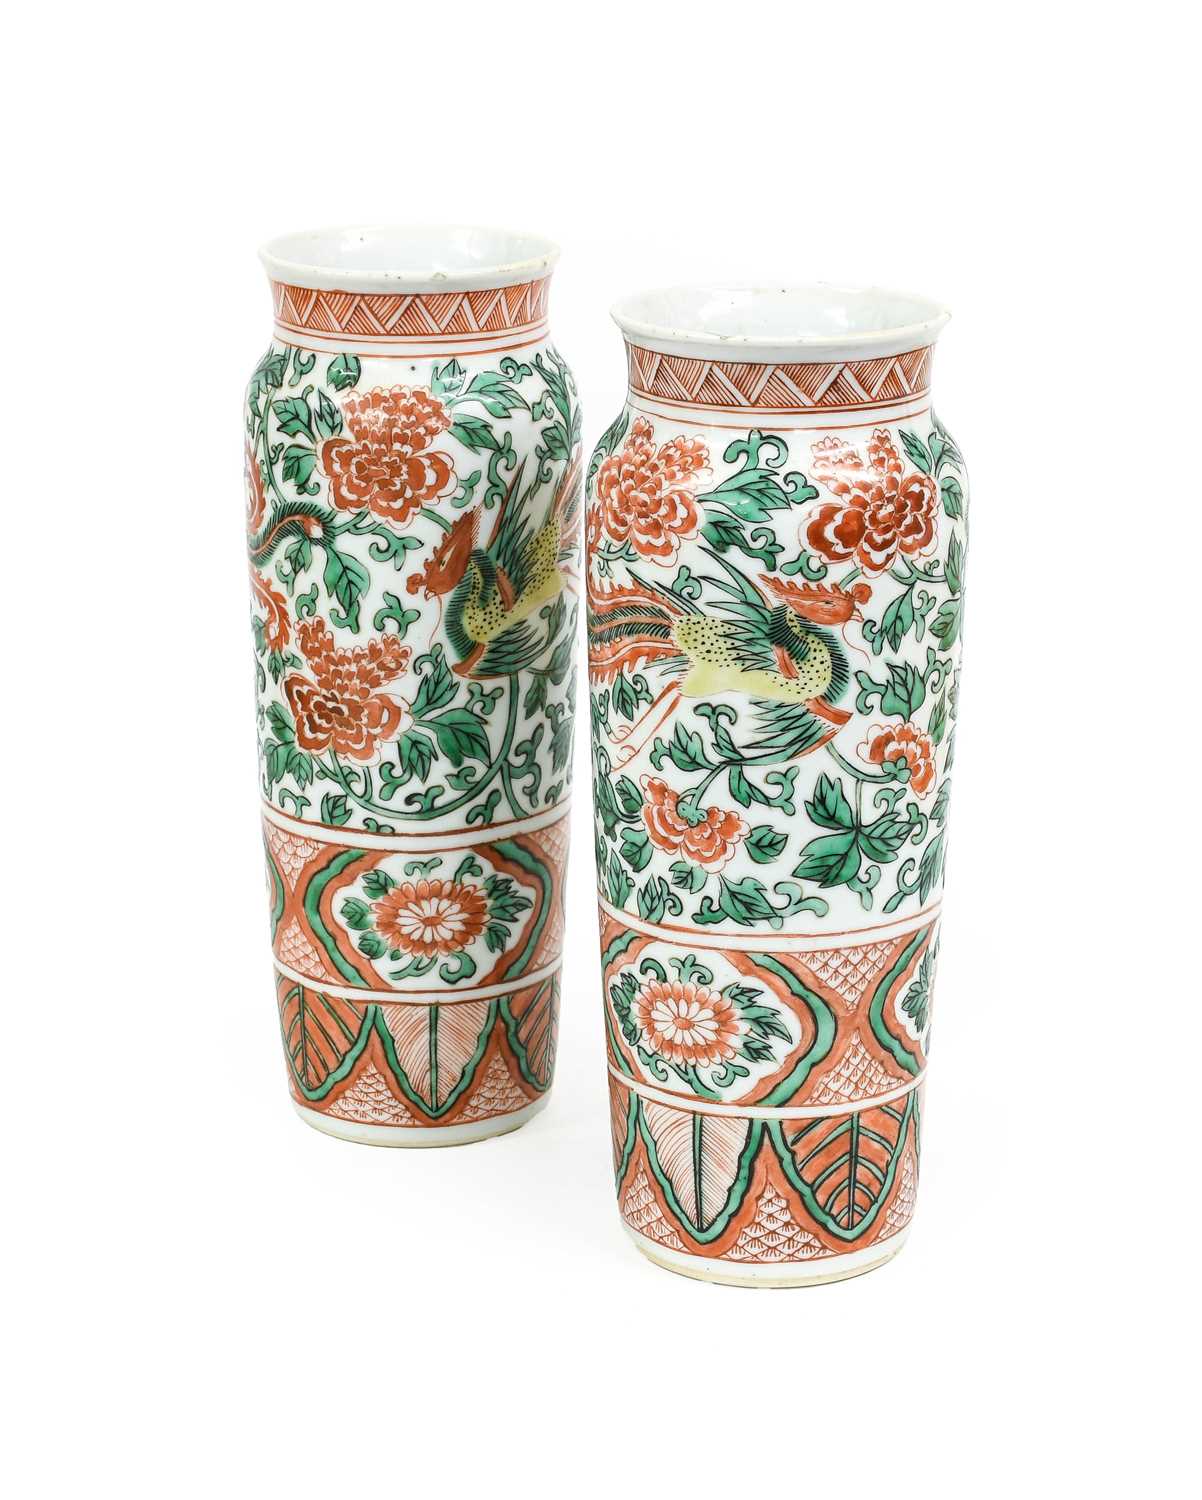 A Pair of Chinese Porcelain Sleeve Vases, in transitional style, painted in green, red and yellow